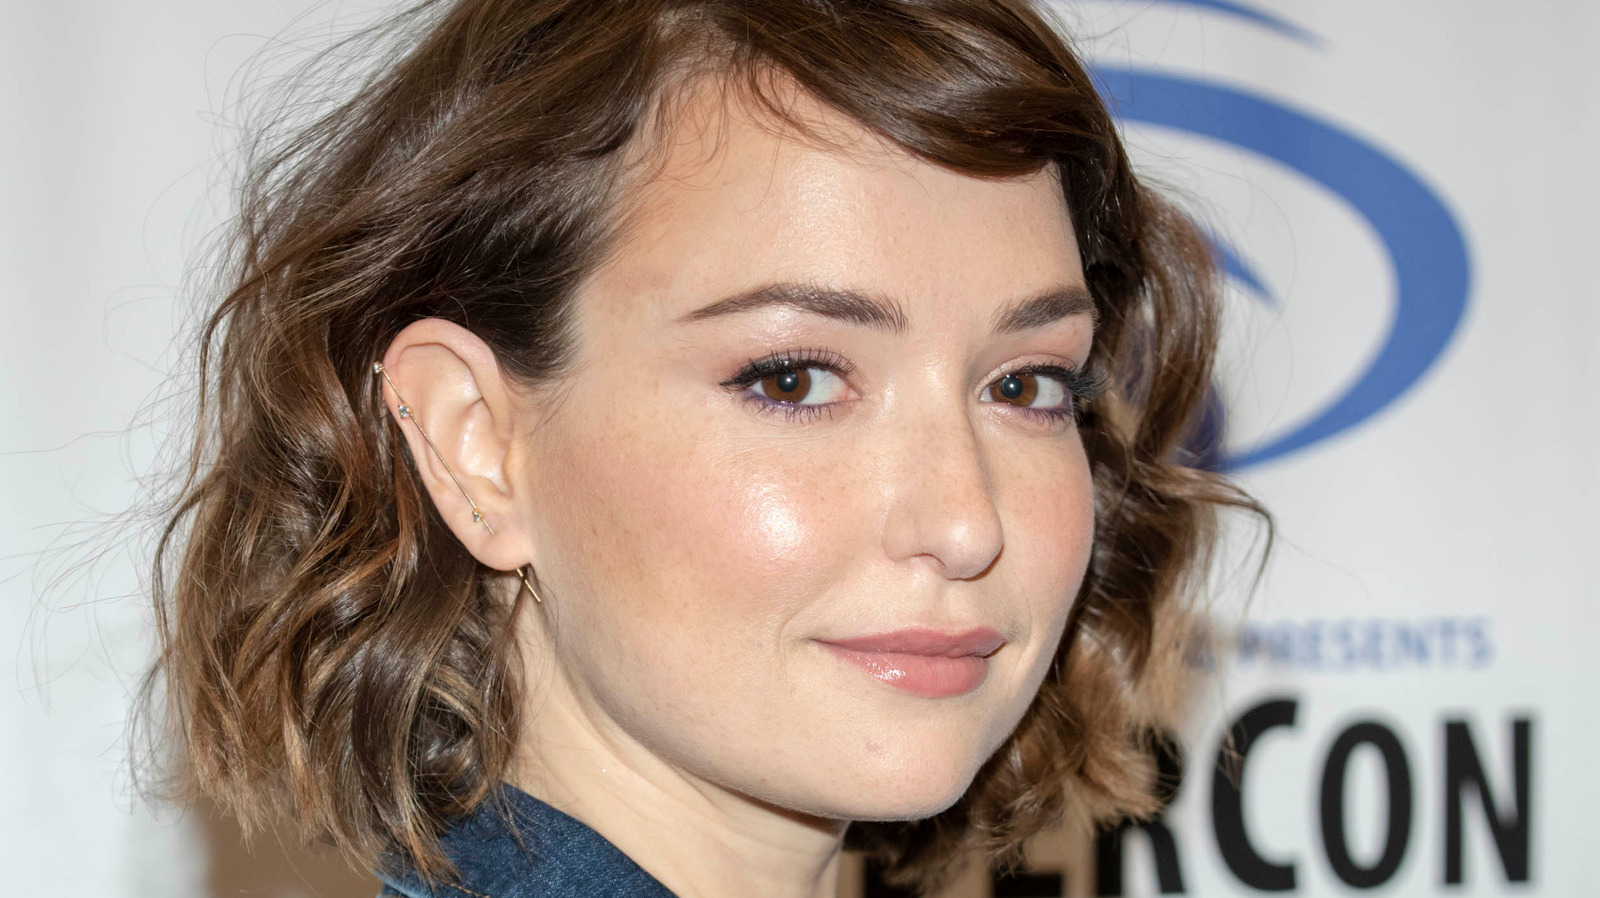 How Much Money Did Milana Vayntrub Actually Make From AT&T?